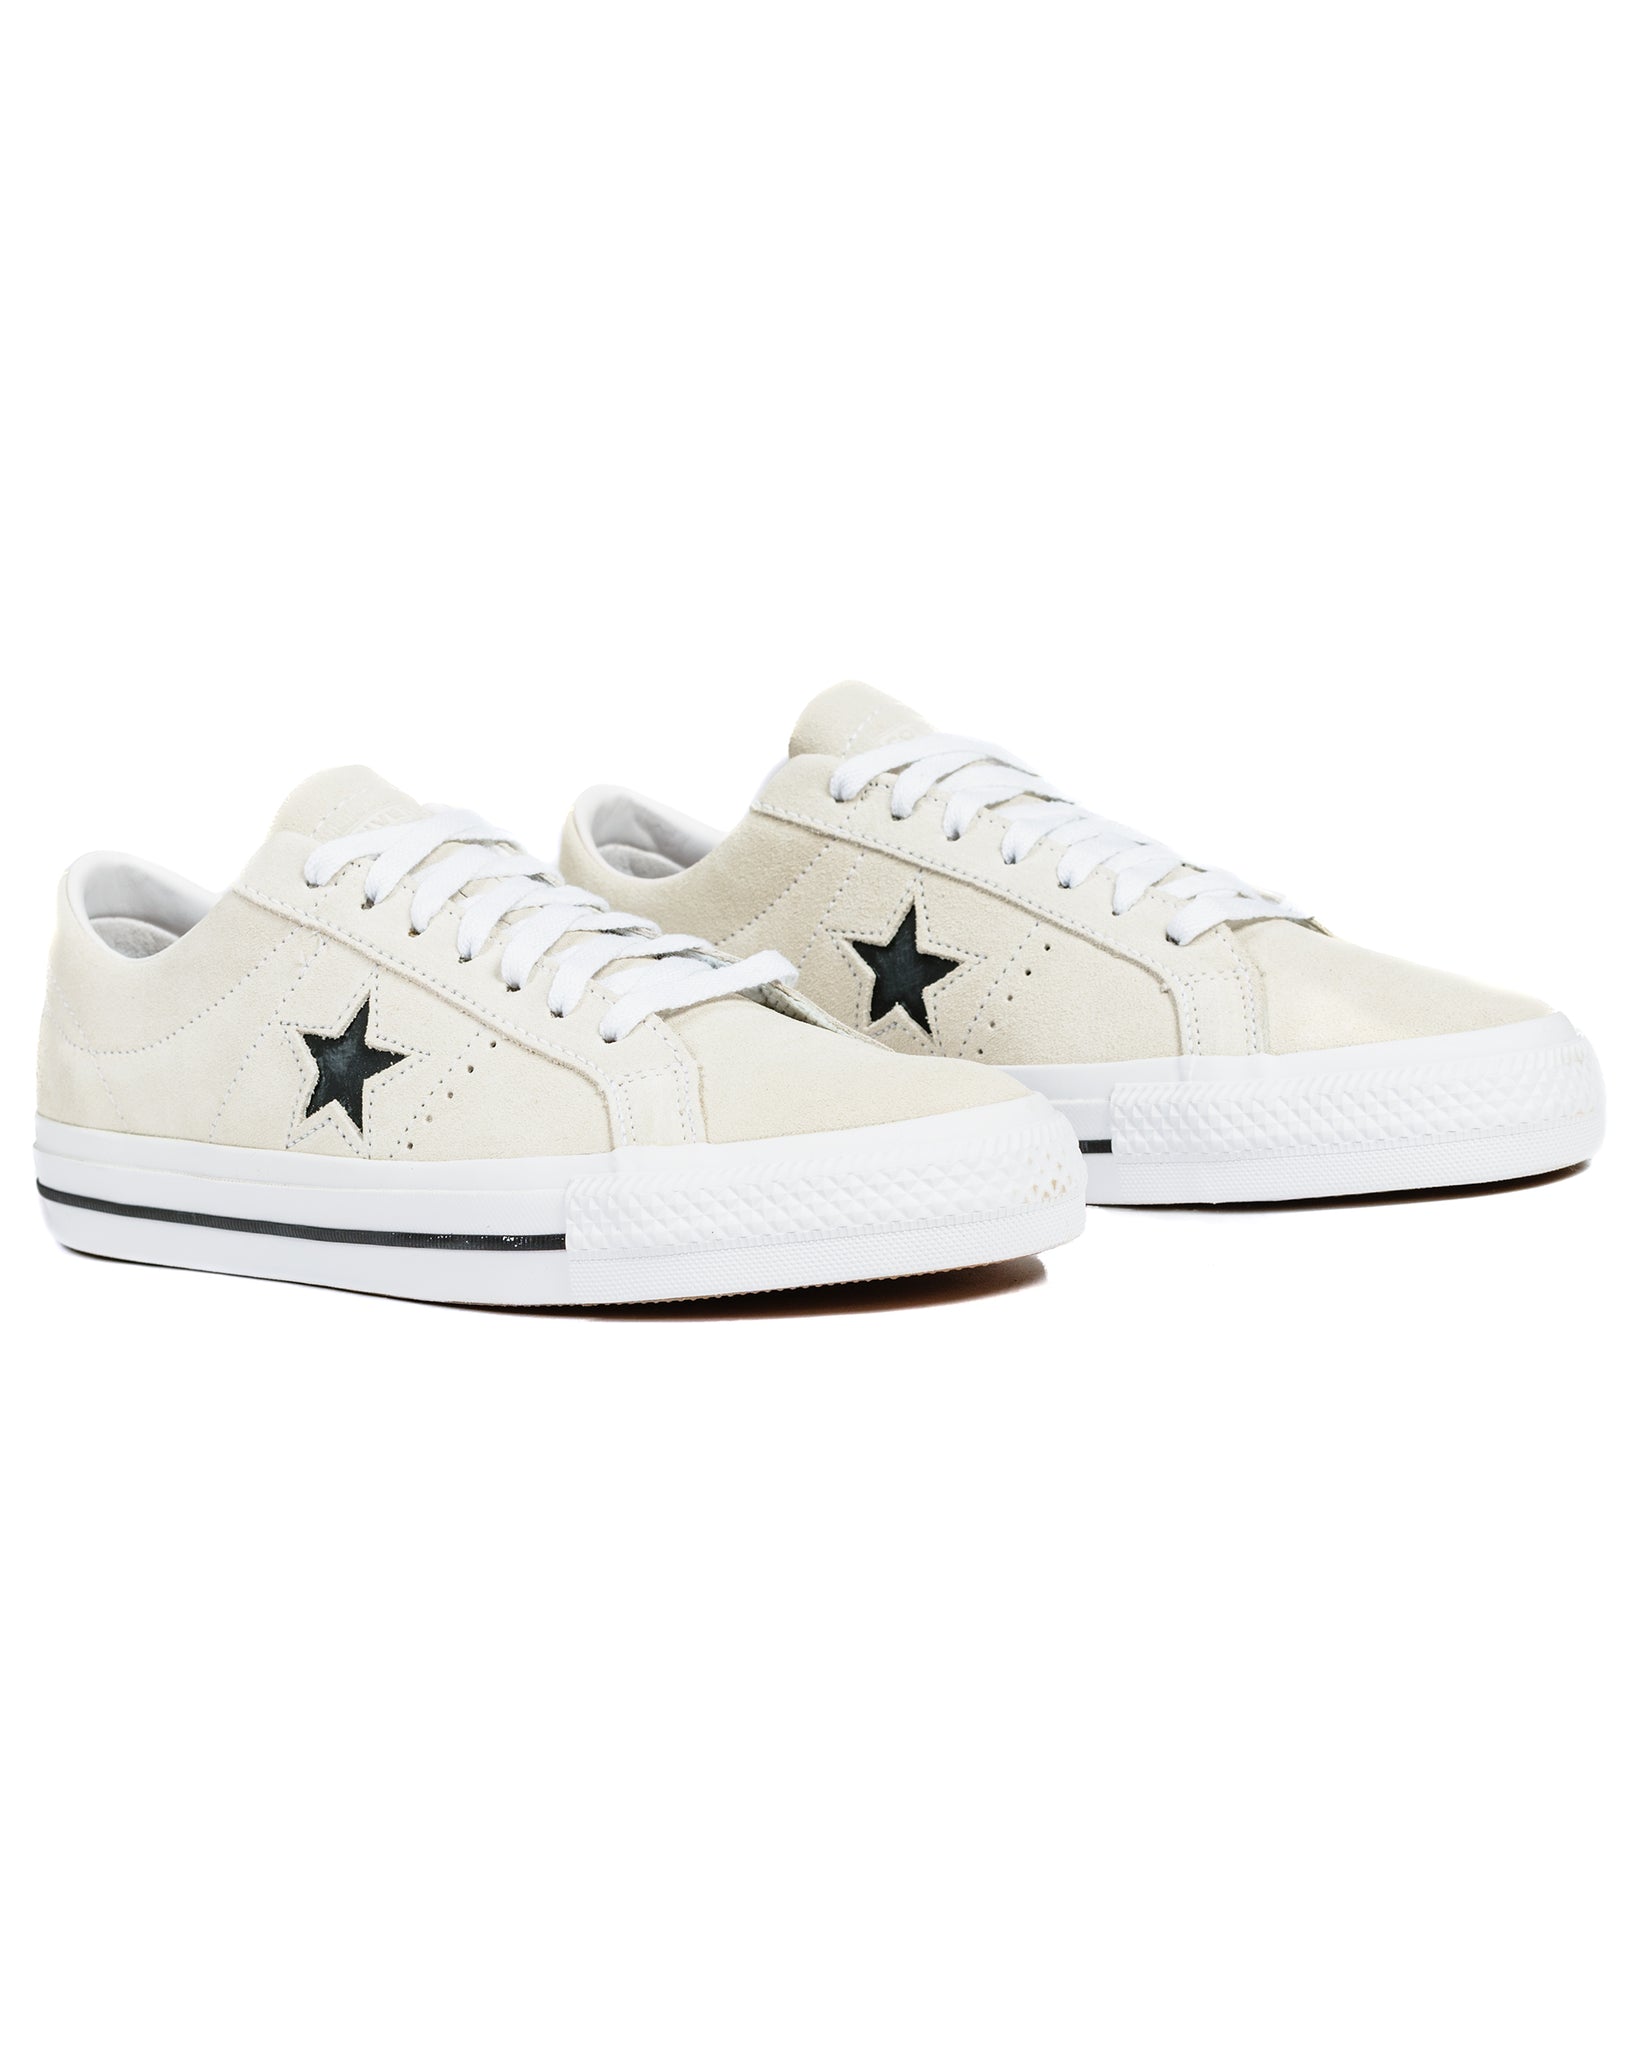 Converse One Star Pro Ox Egret 172950C Side